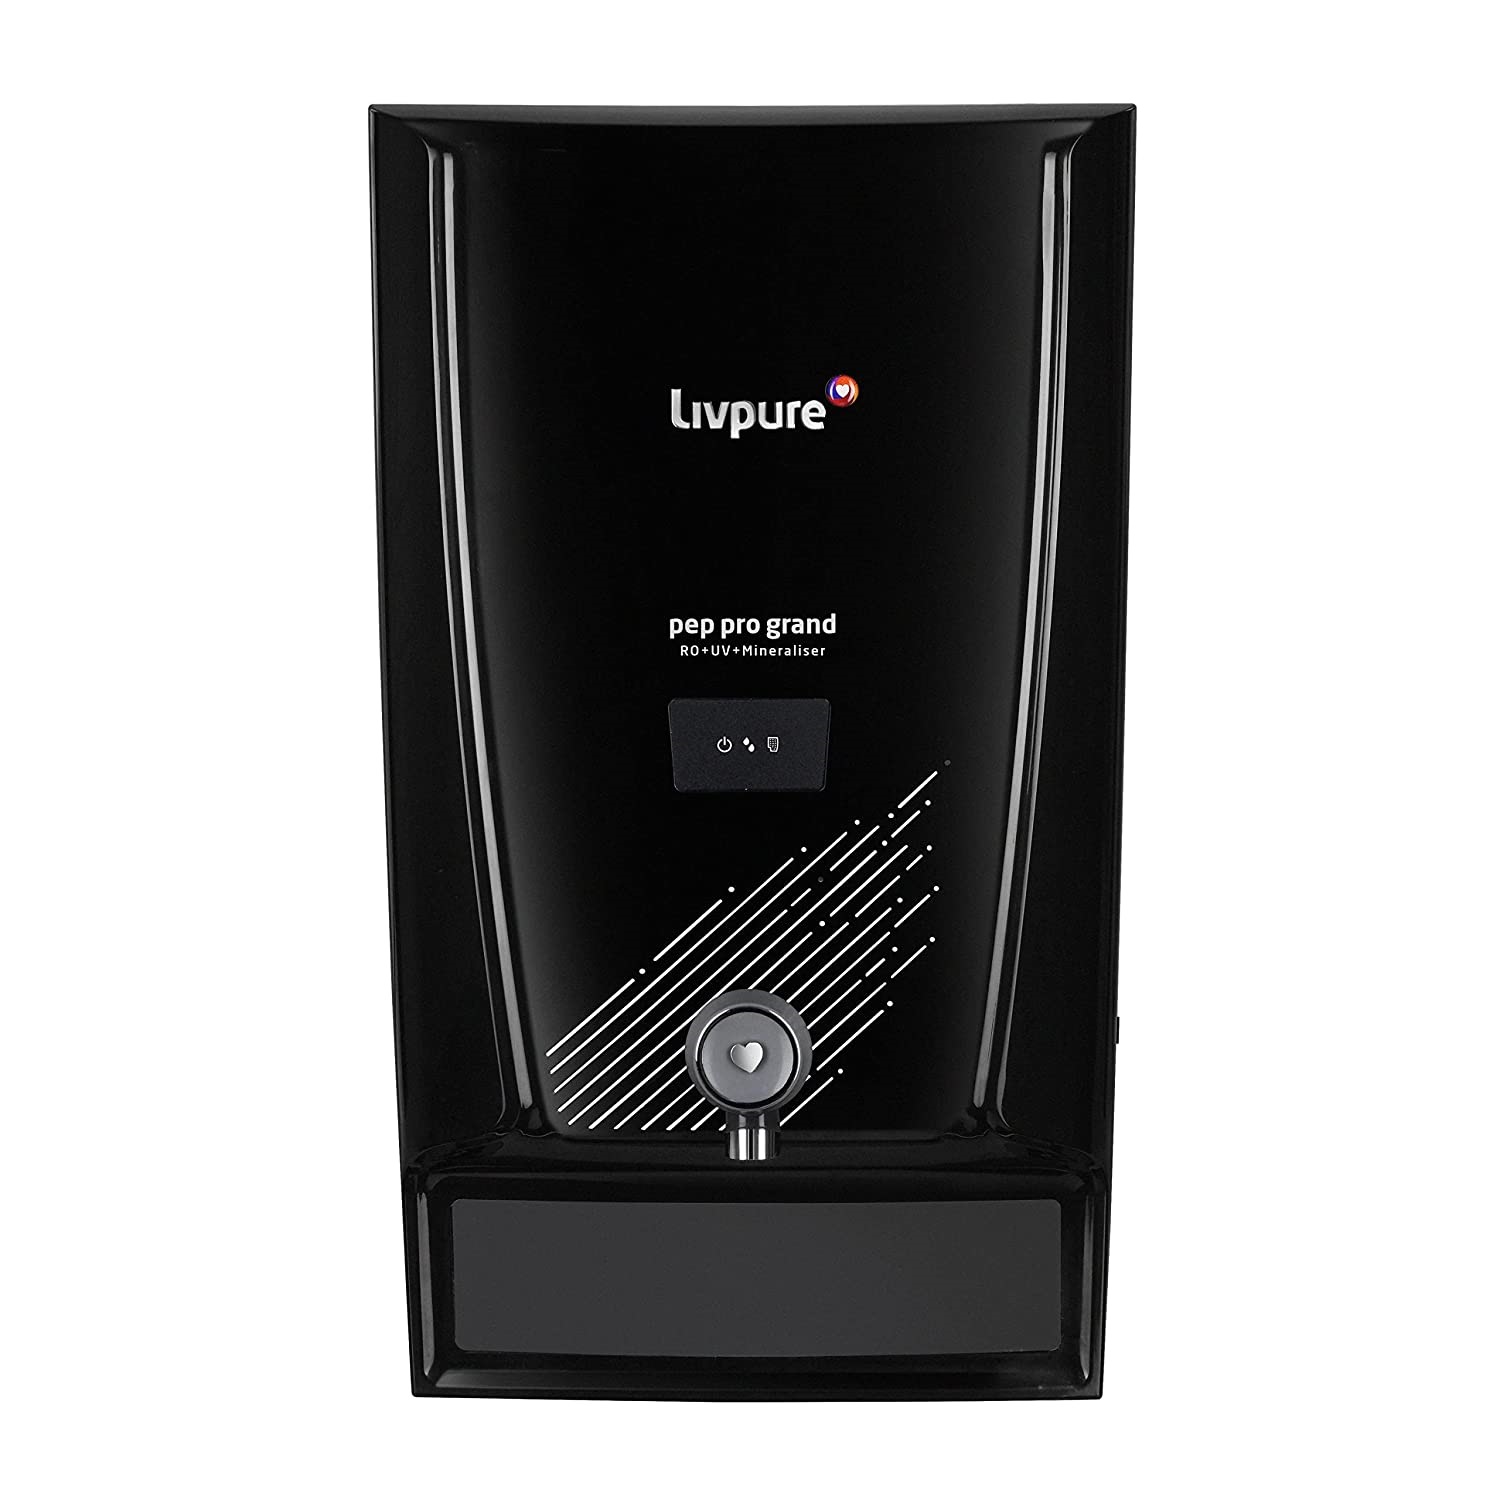 Livpure Pep Pro Grand Water Purifier, Wall Mountable, RO+UV+Mineraliser, 7 L Storage Tank - Black, 15 LPH Purifier for home